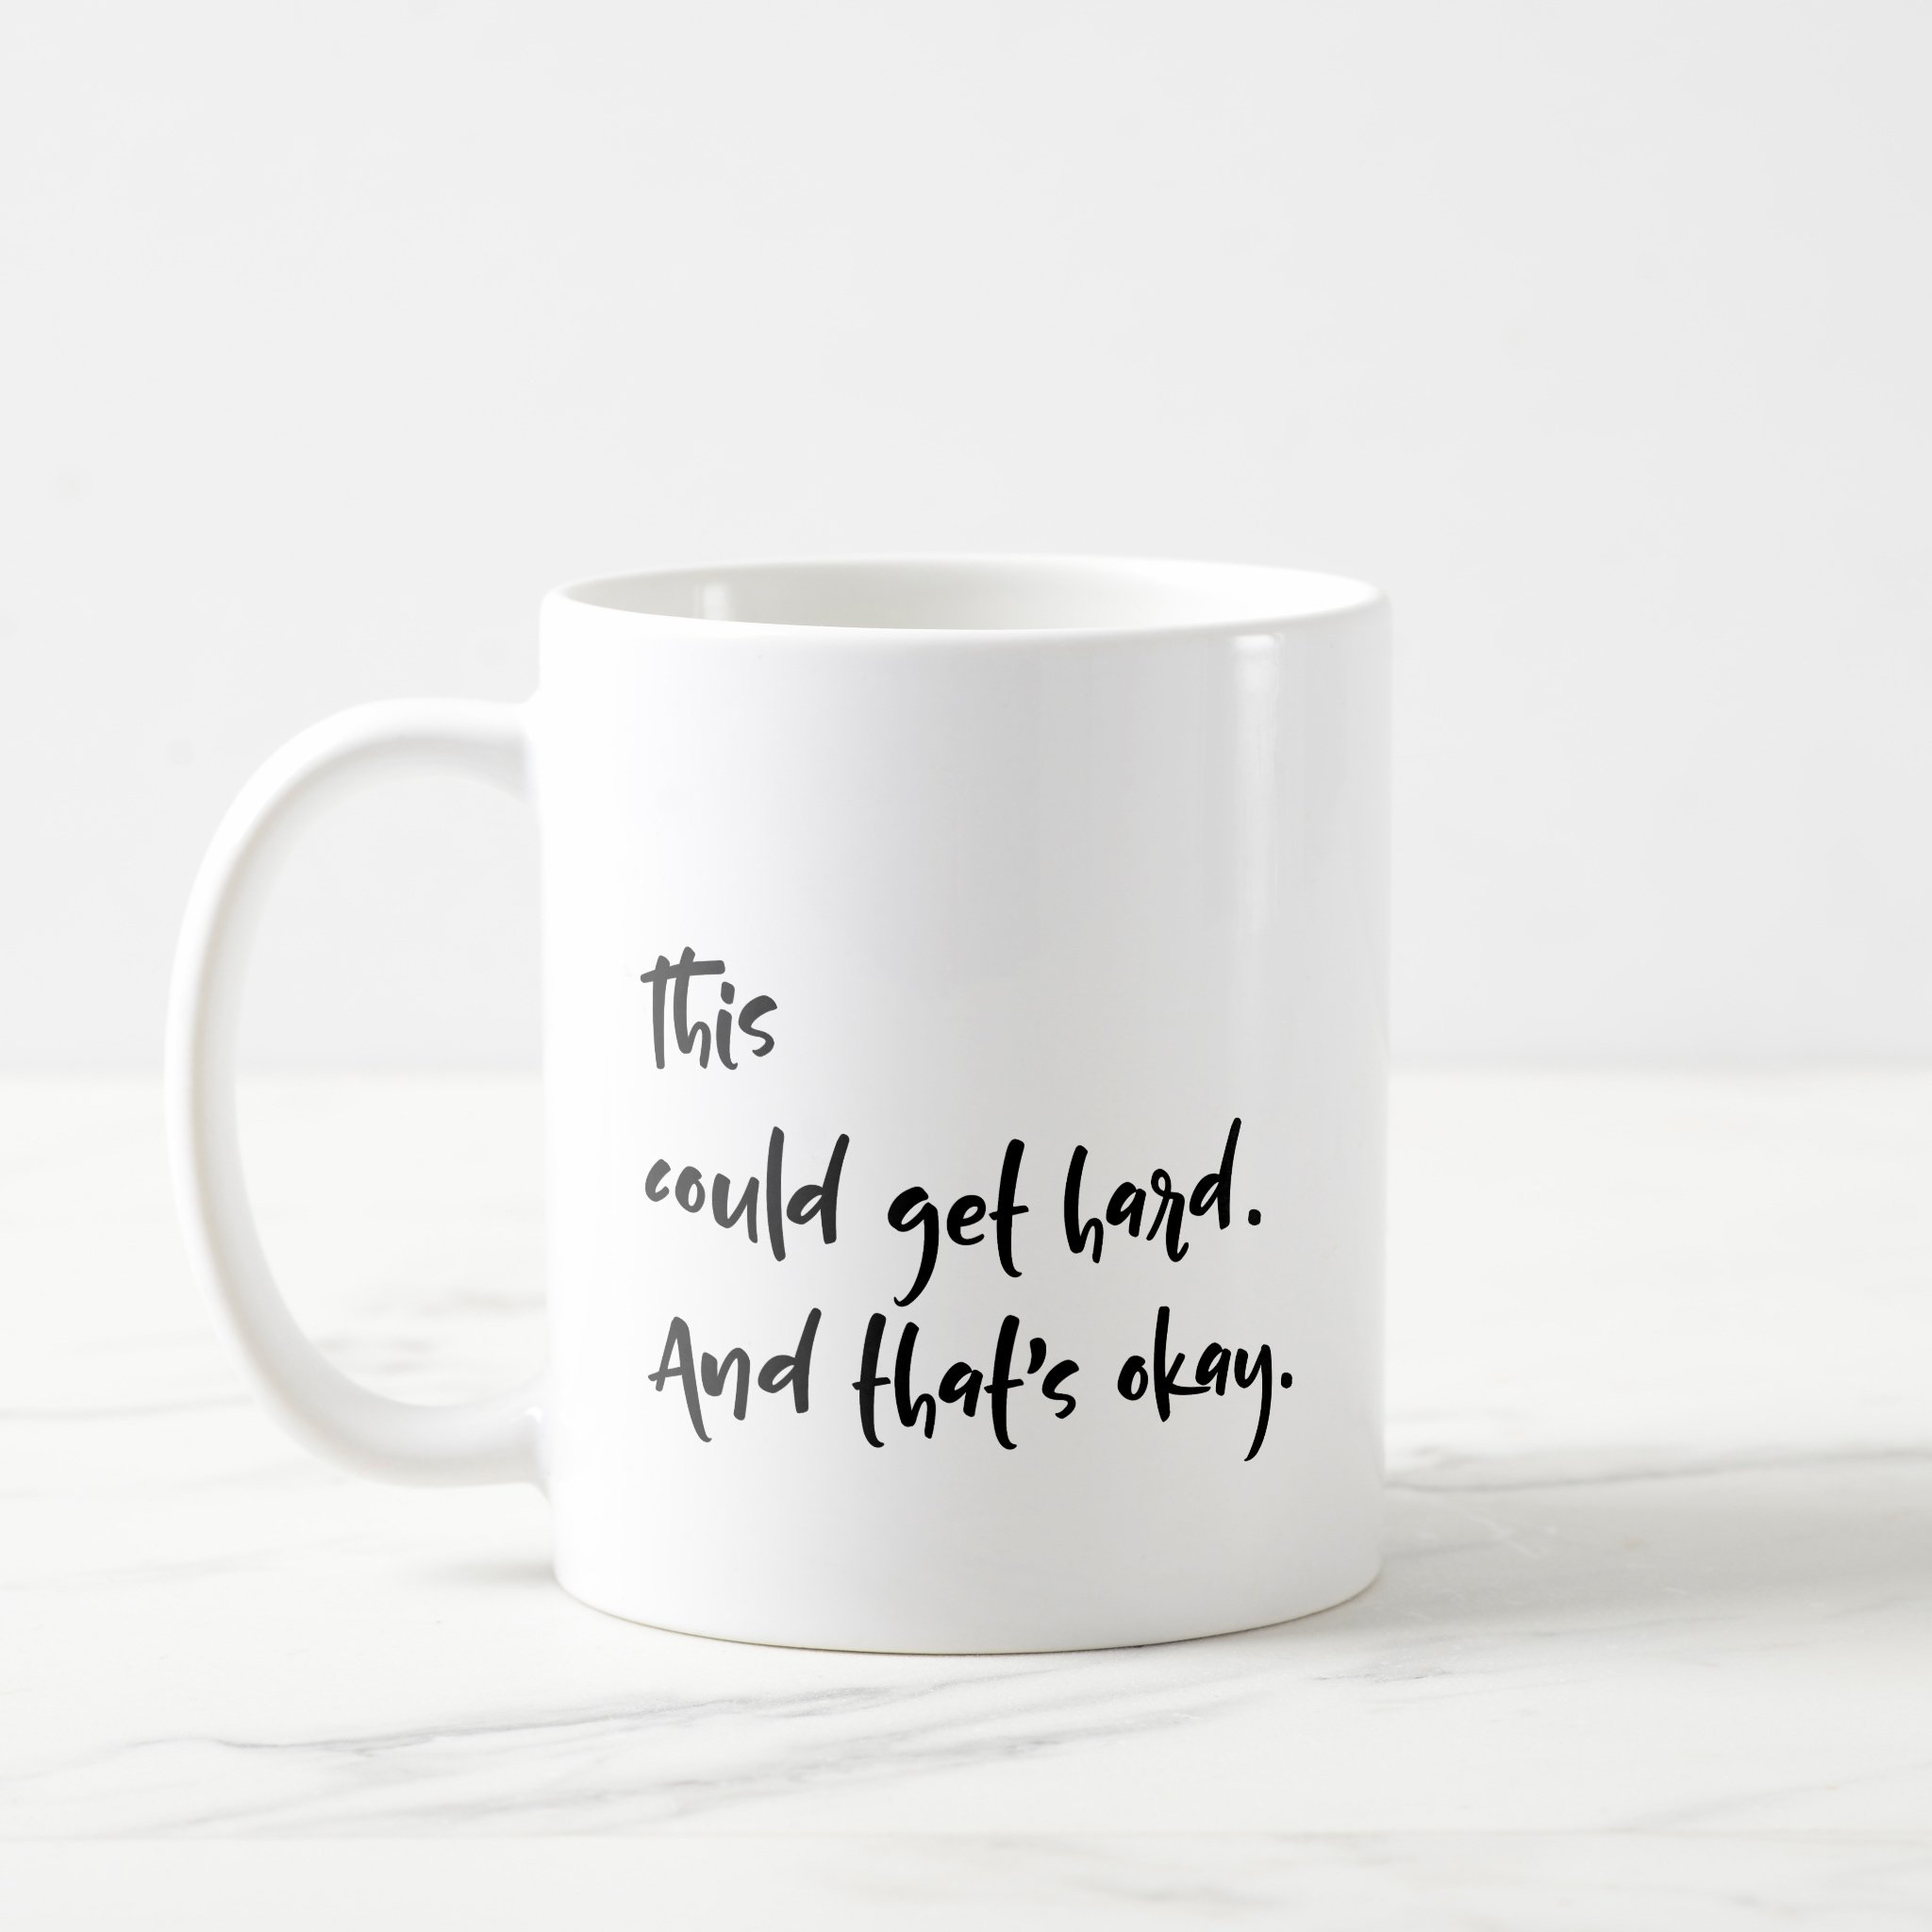 This-could-get-hard-And-that's-okay-quirky-gift-mug.jpg